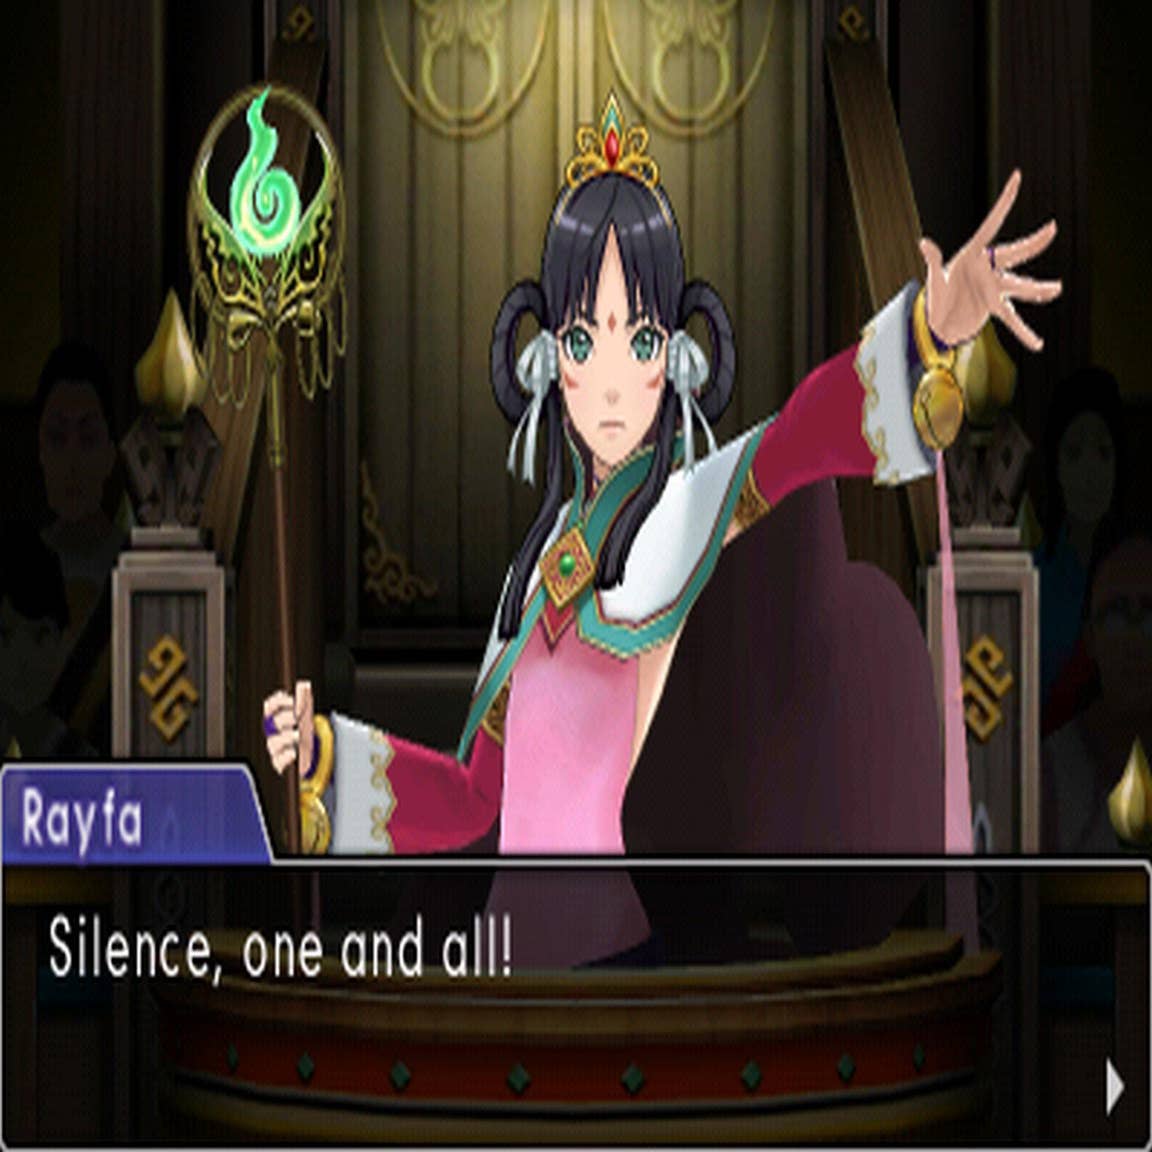 Phoenix Wright: Ace Attorney - Spirit of Justice devs give